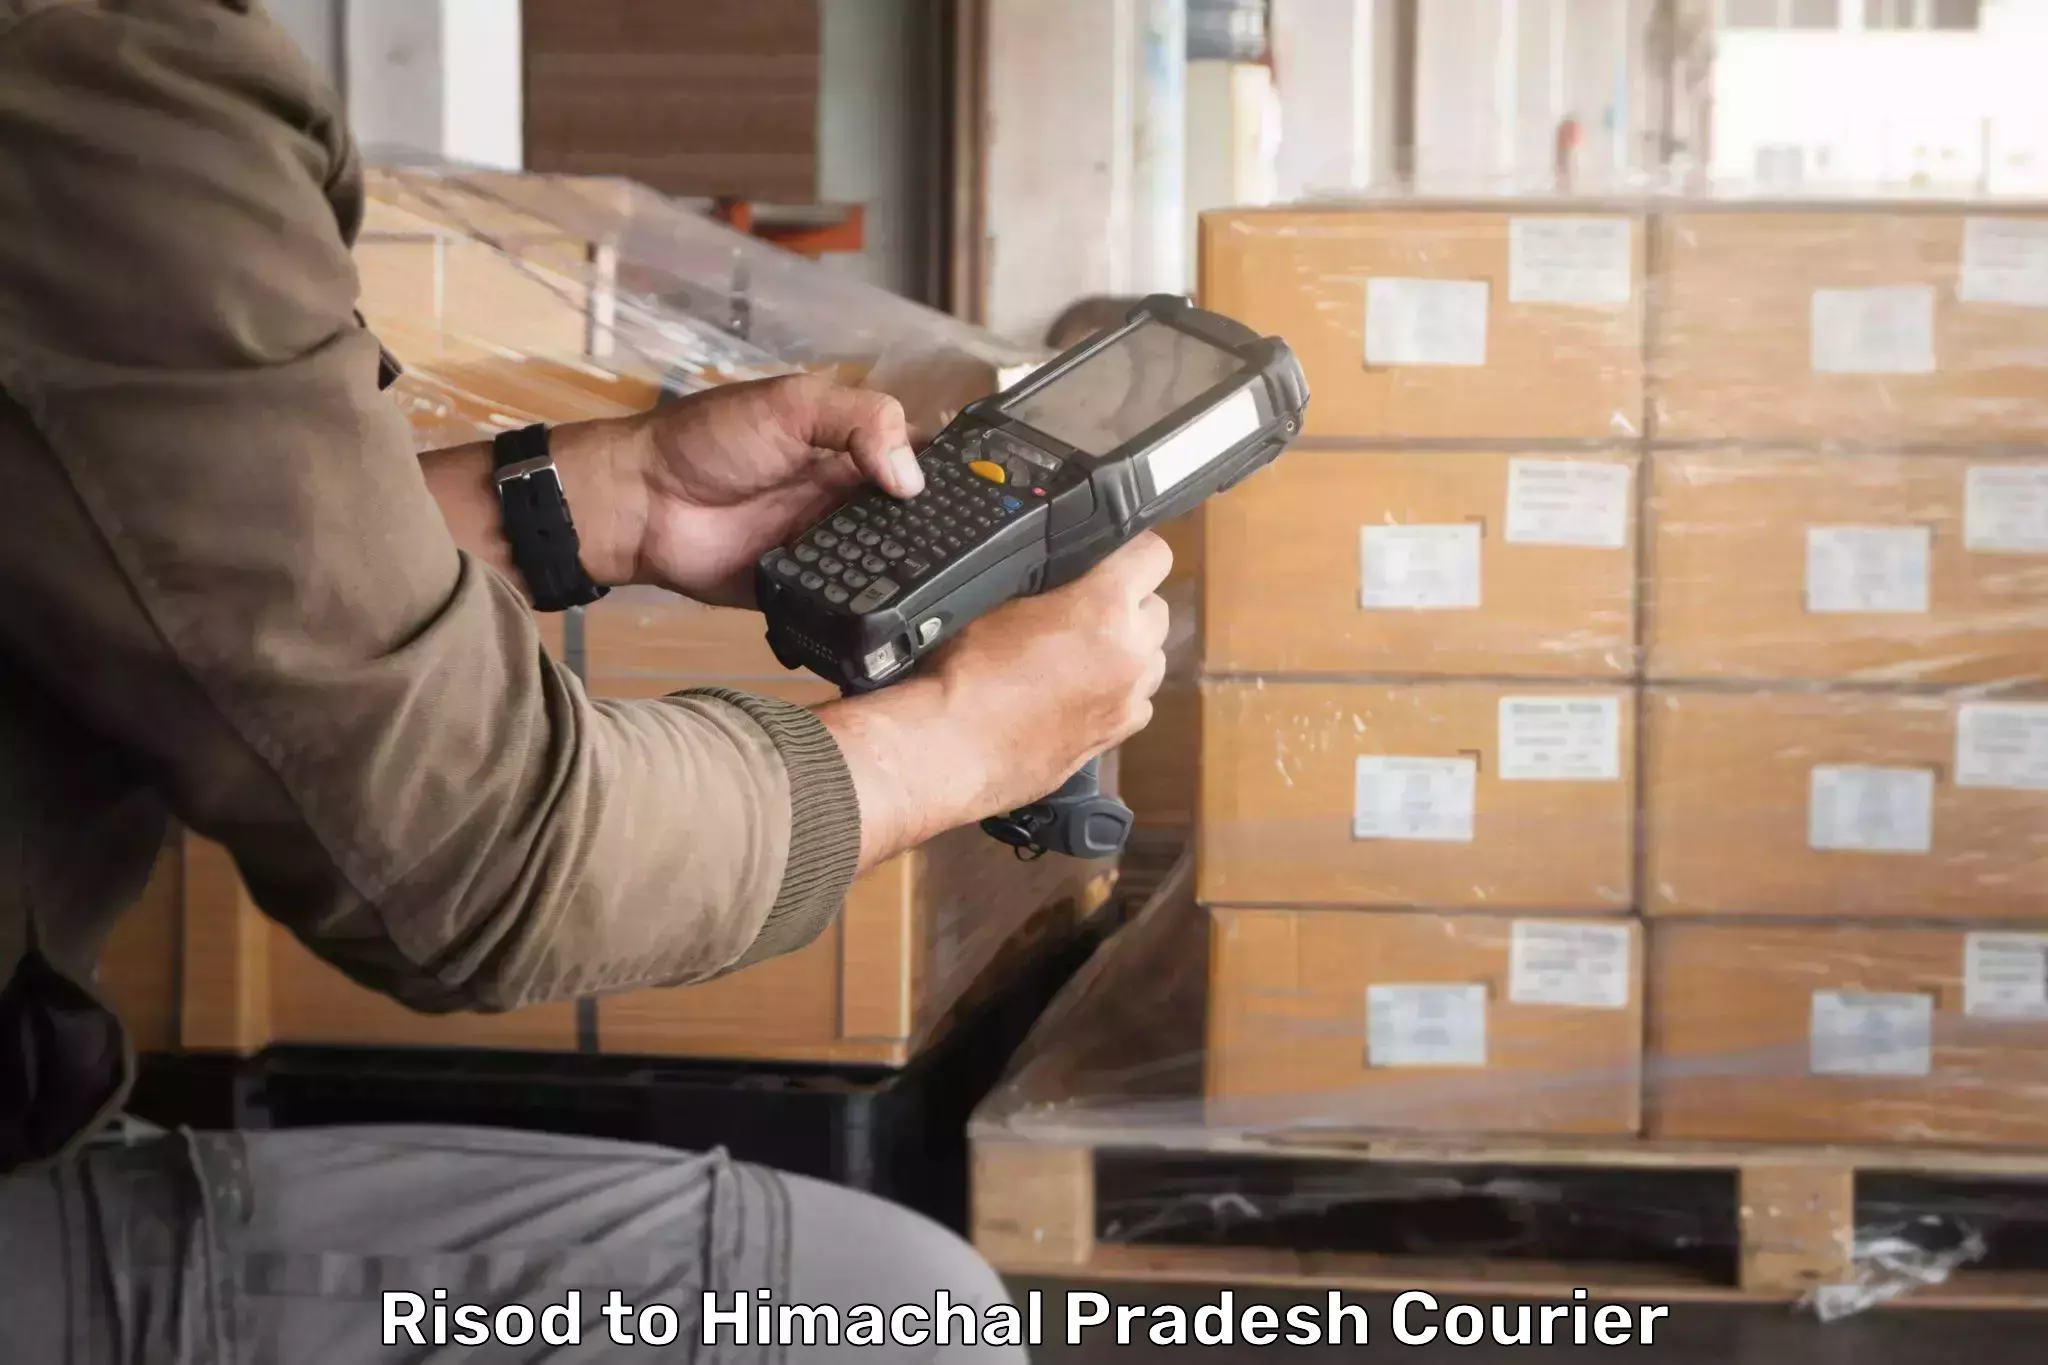 Round-the-clock parcel delivery Risod to Himachal Pradesh